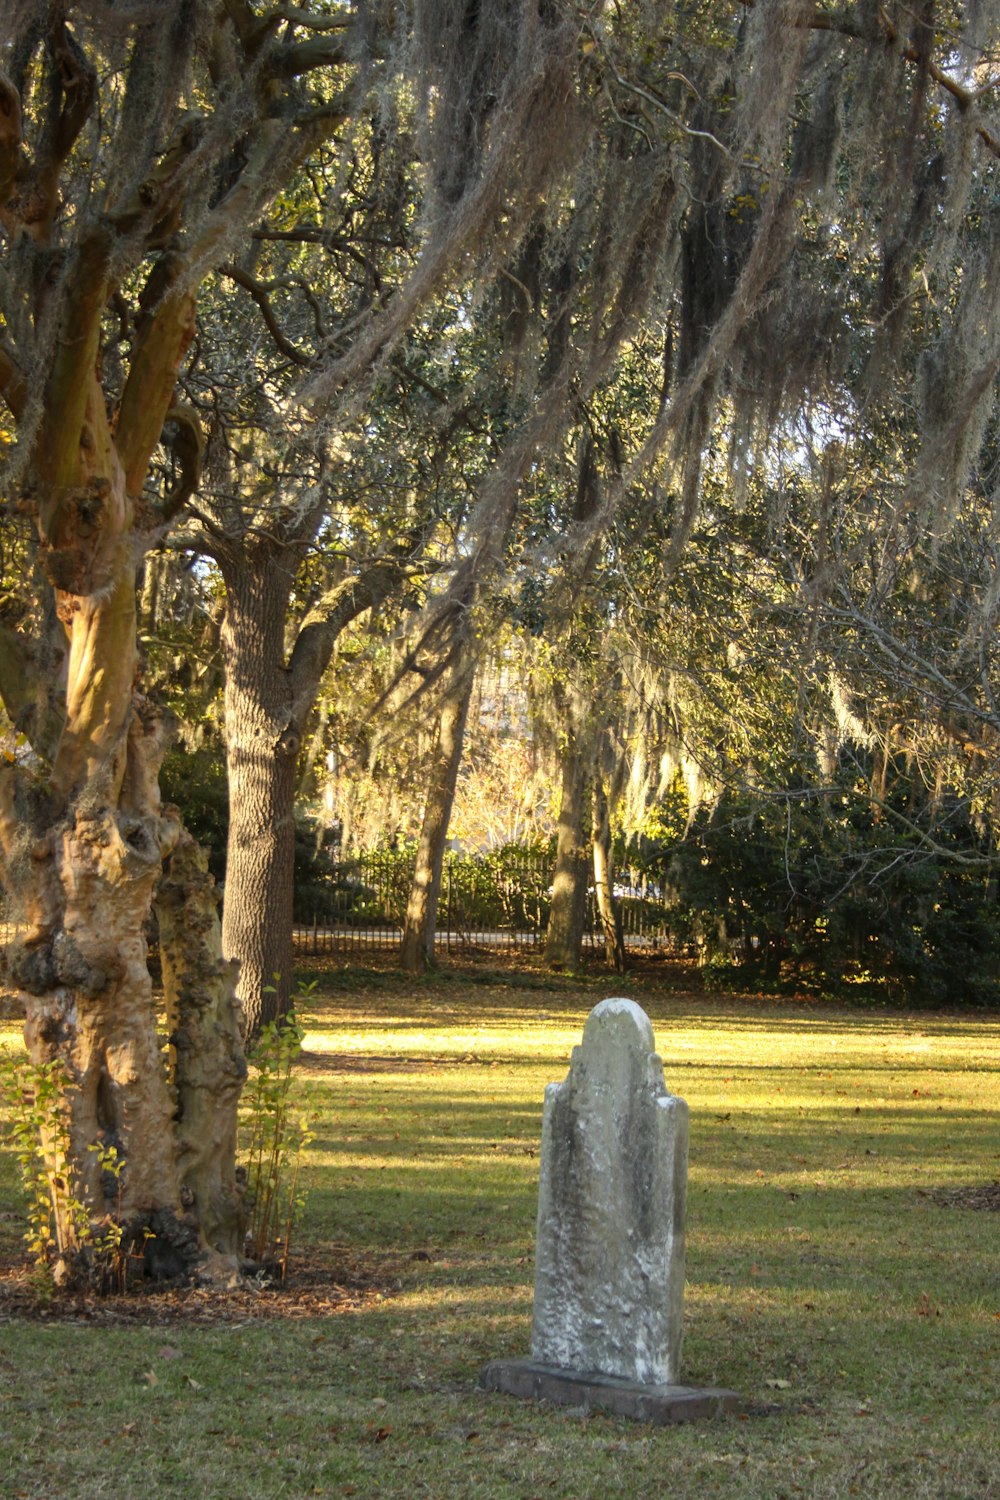 a stone monument in a grassy area with trees in the background